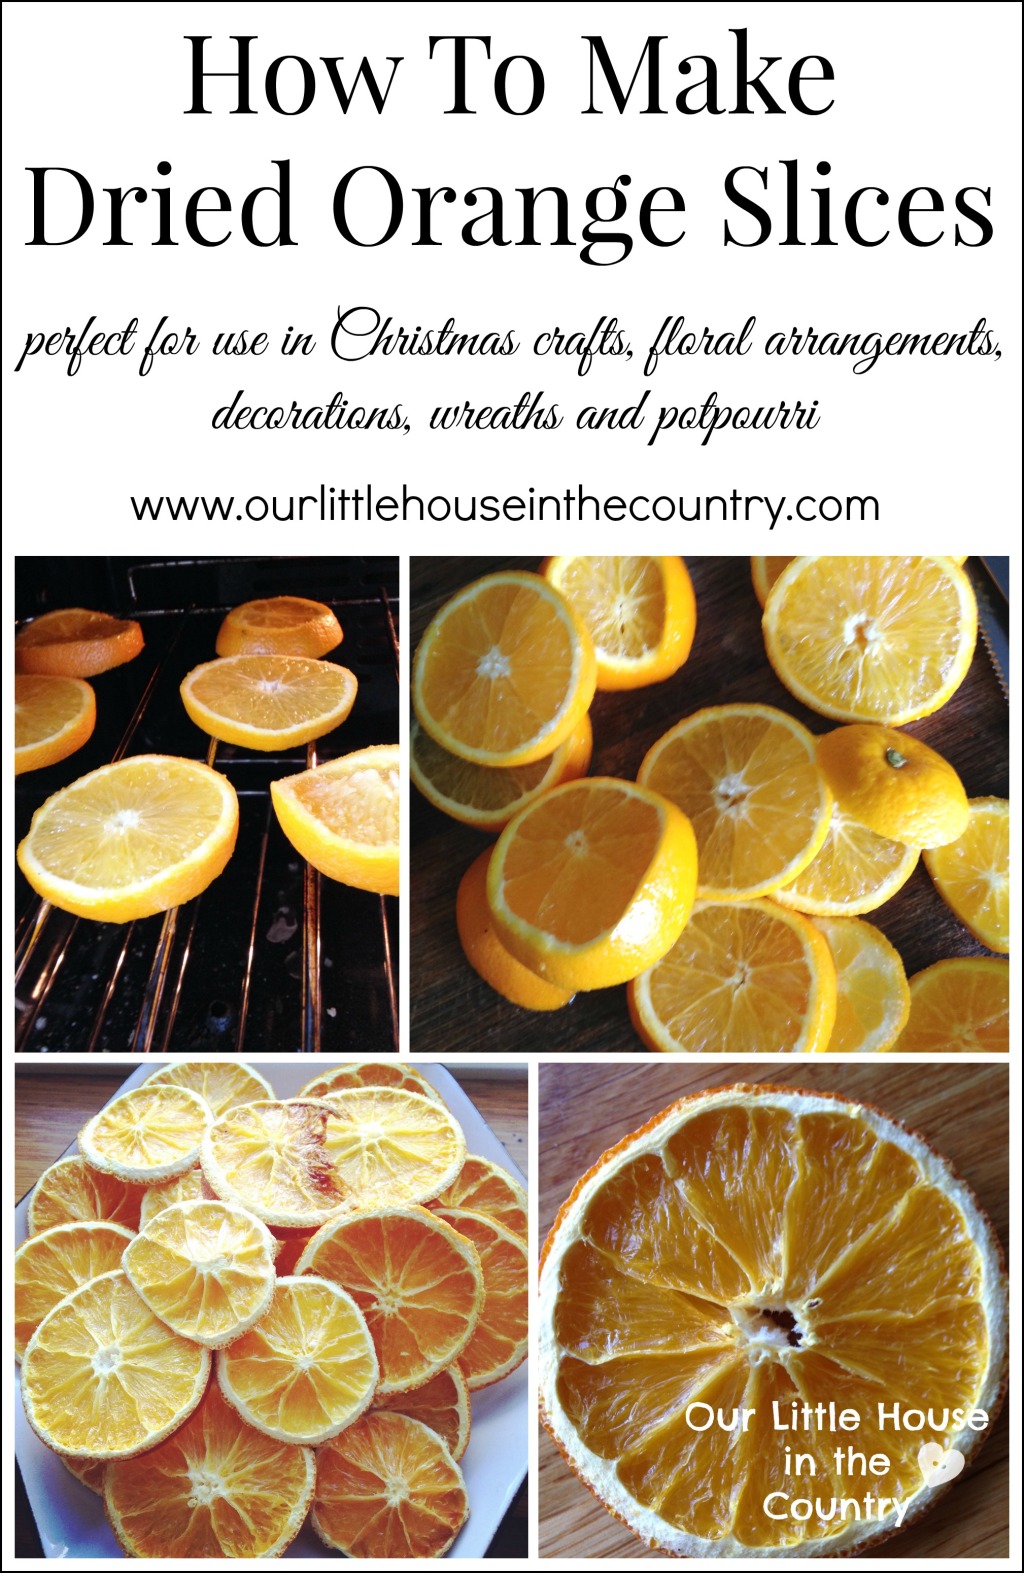 How to Make Dried Orange Slices